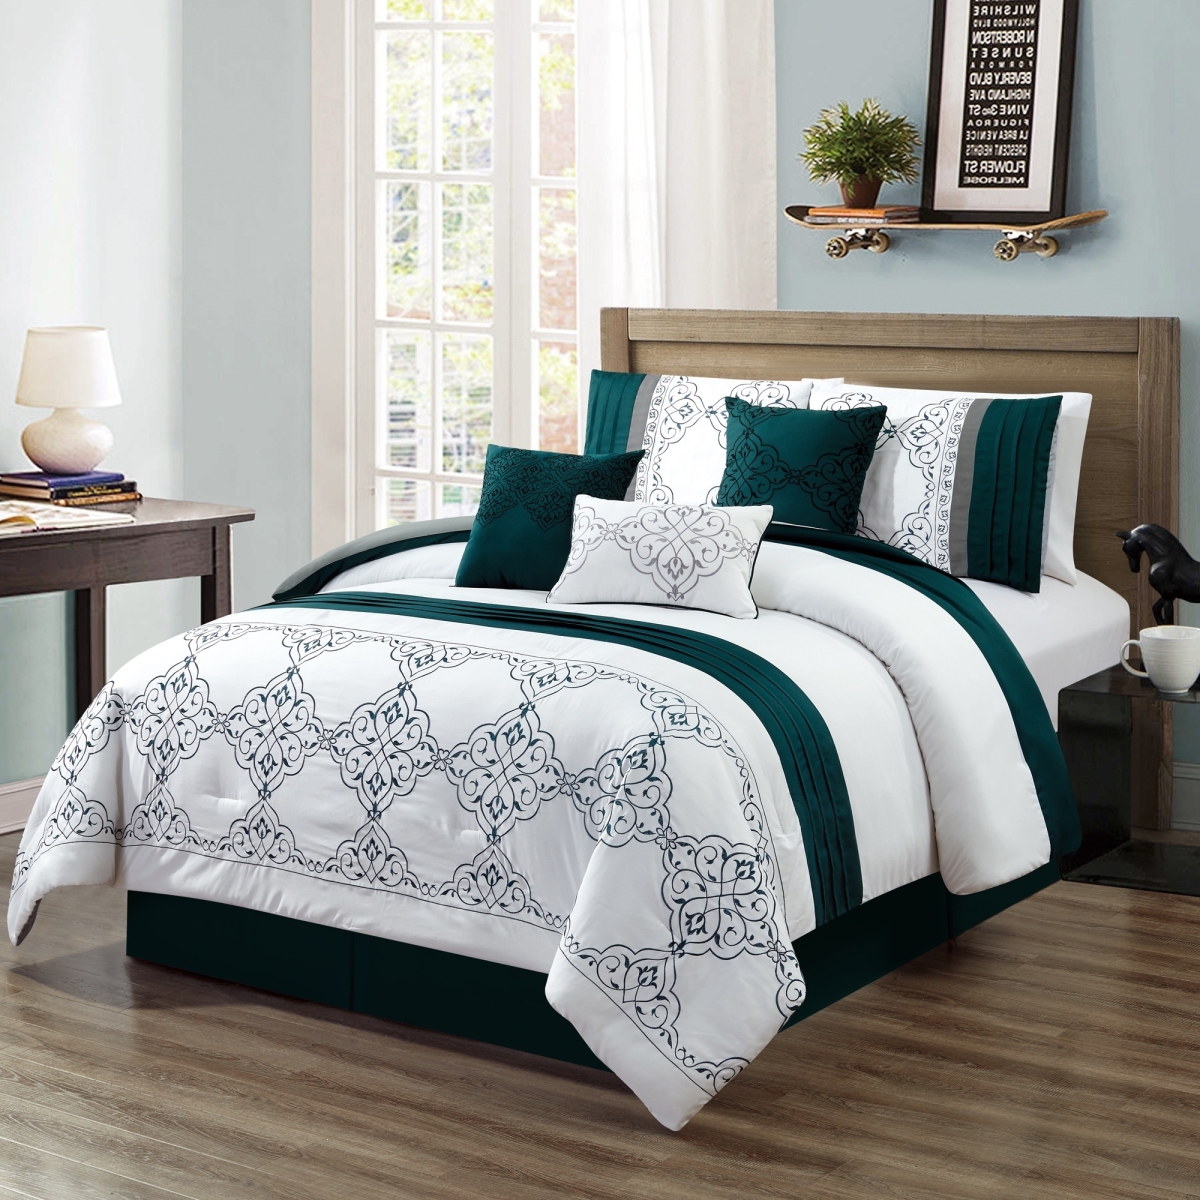 21299q Chula Embroidery 7 Piece Comforter Set, Queen